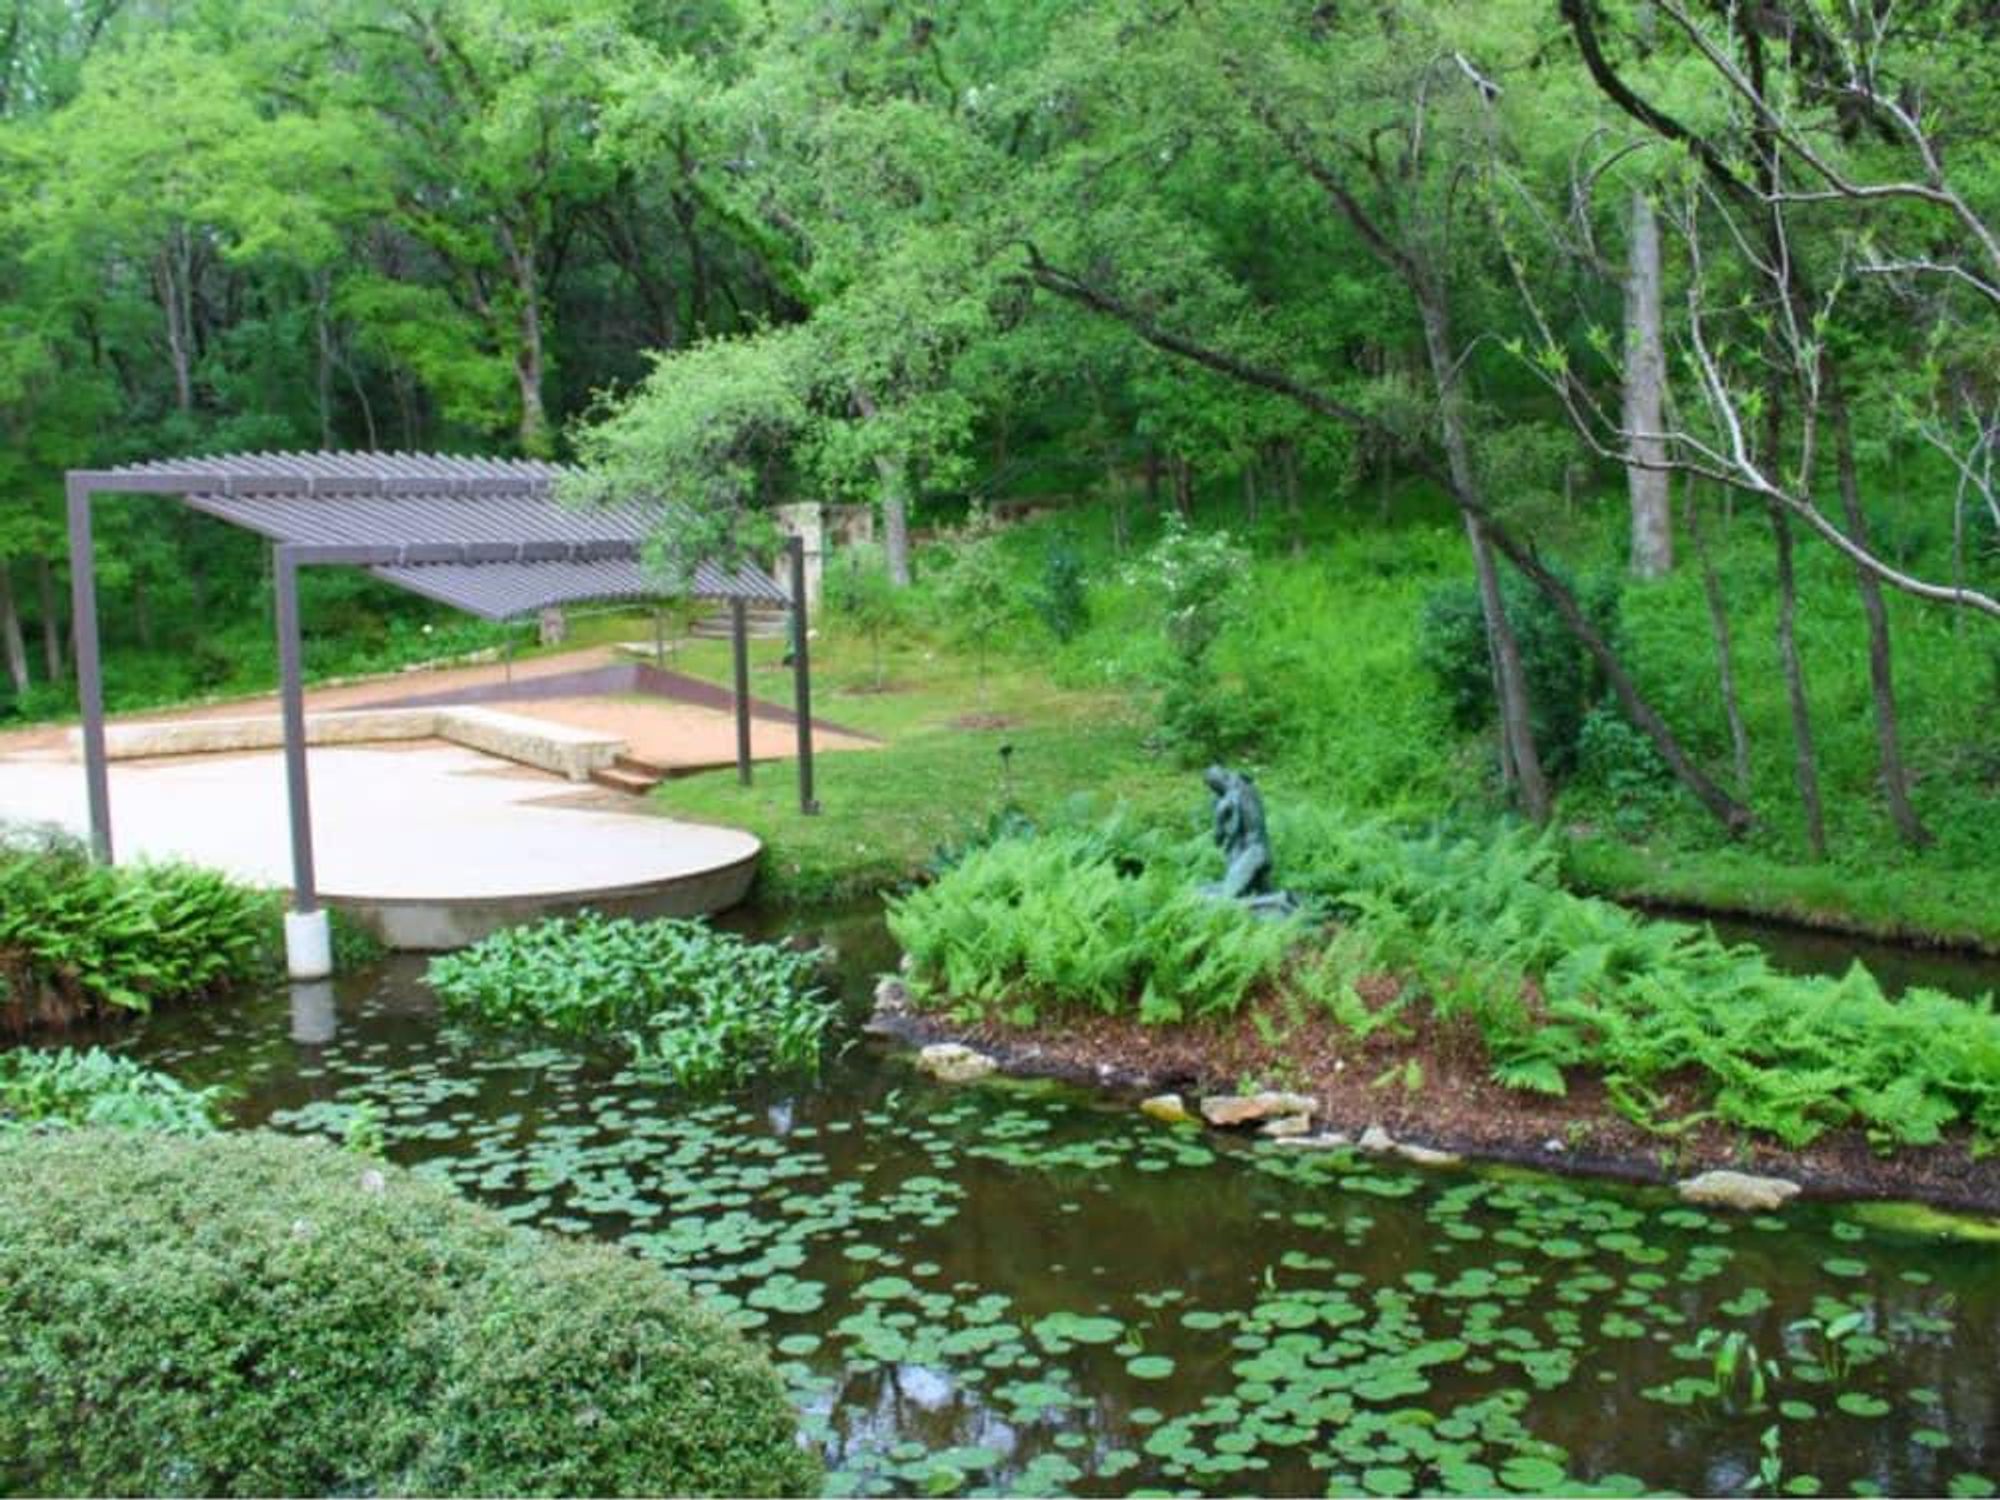 outside terrace and pond at the Umlauf Sculpture Garden